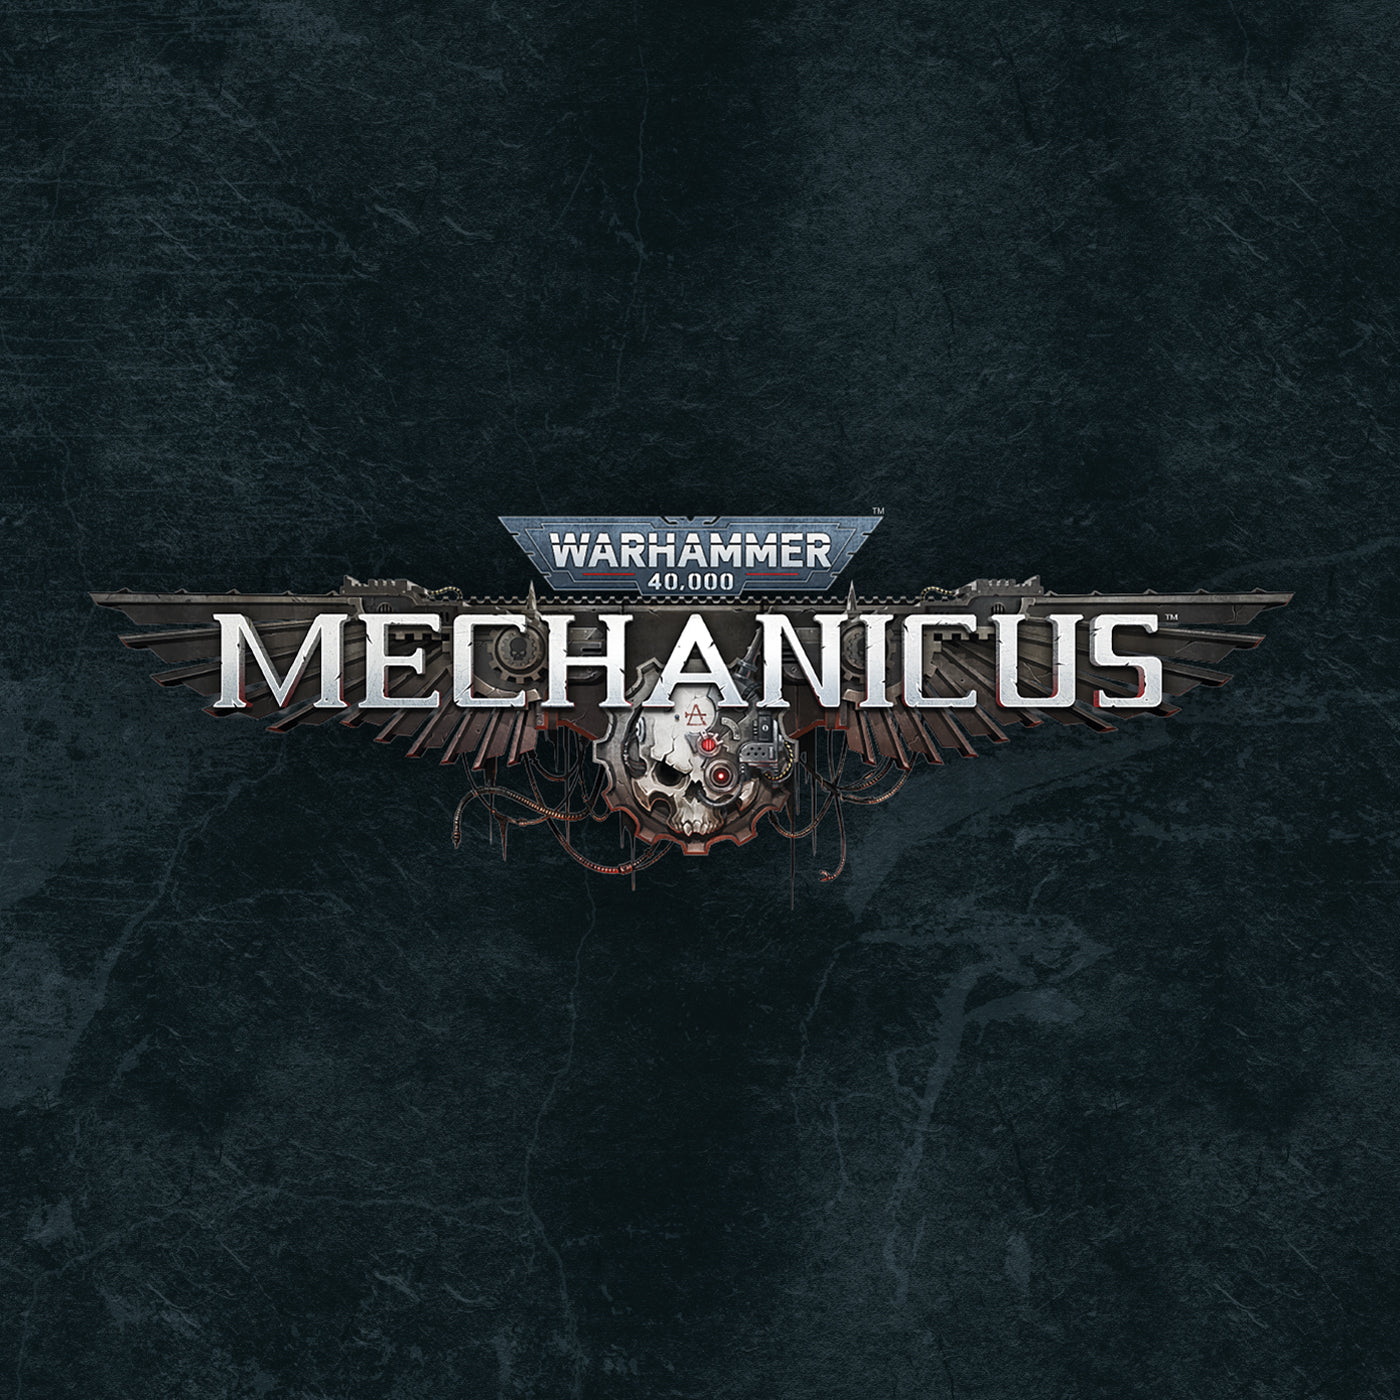 GUILLAUME DAVID - Warhammer 40,000: Mechanicus (Original Soundtrack) - 2LP - Deluxe Cloudy Red / Cloudy Green Coloured Vinyl